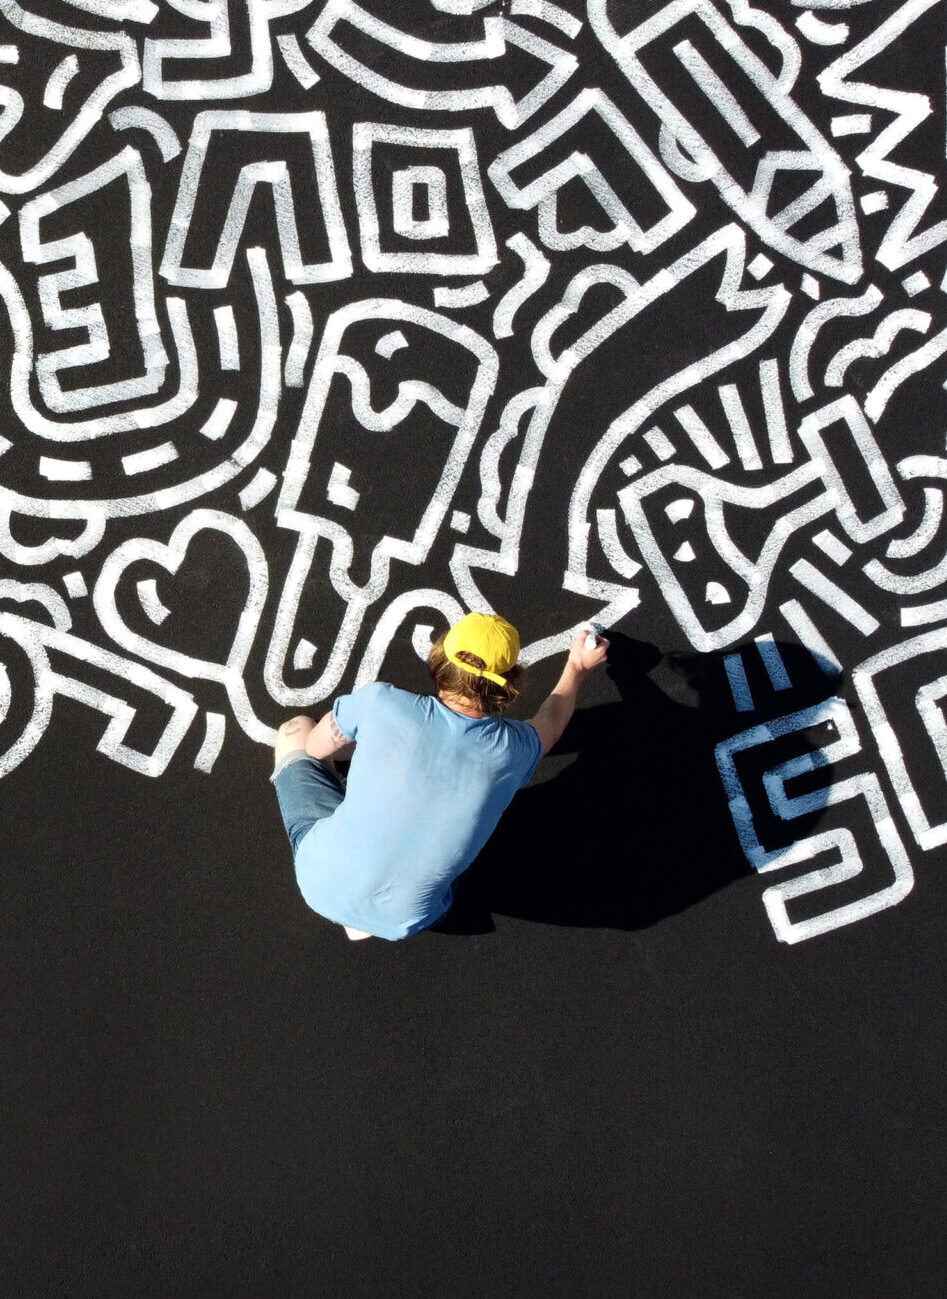 Keith haring's doodles on a black pavement.